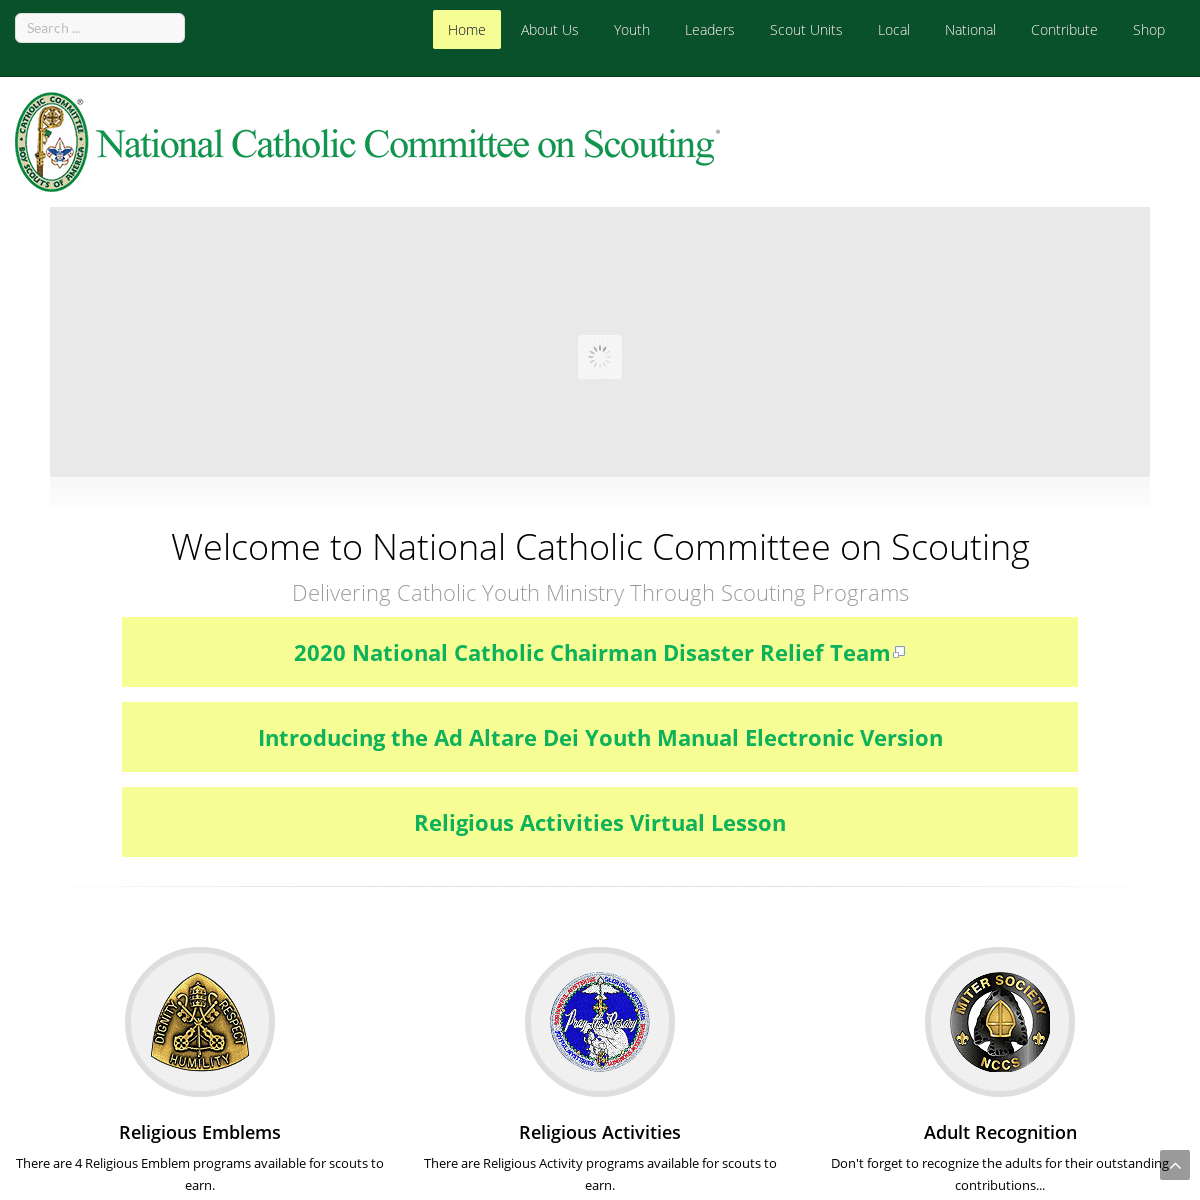 A complete backup of https://nccs-bsa.org